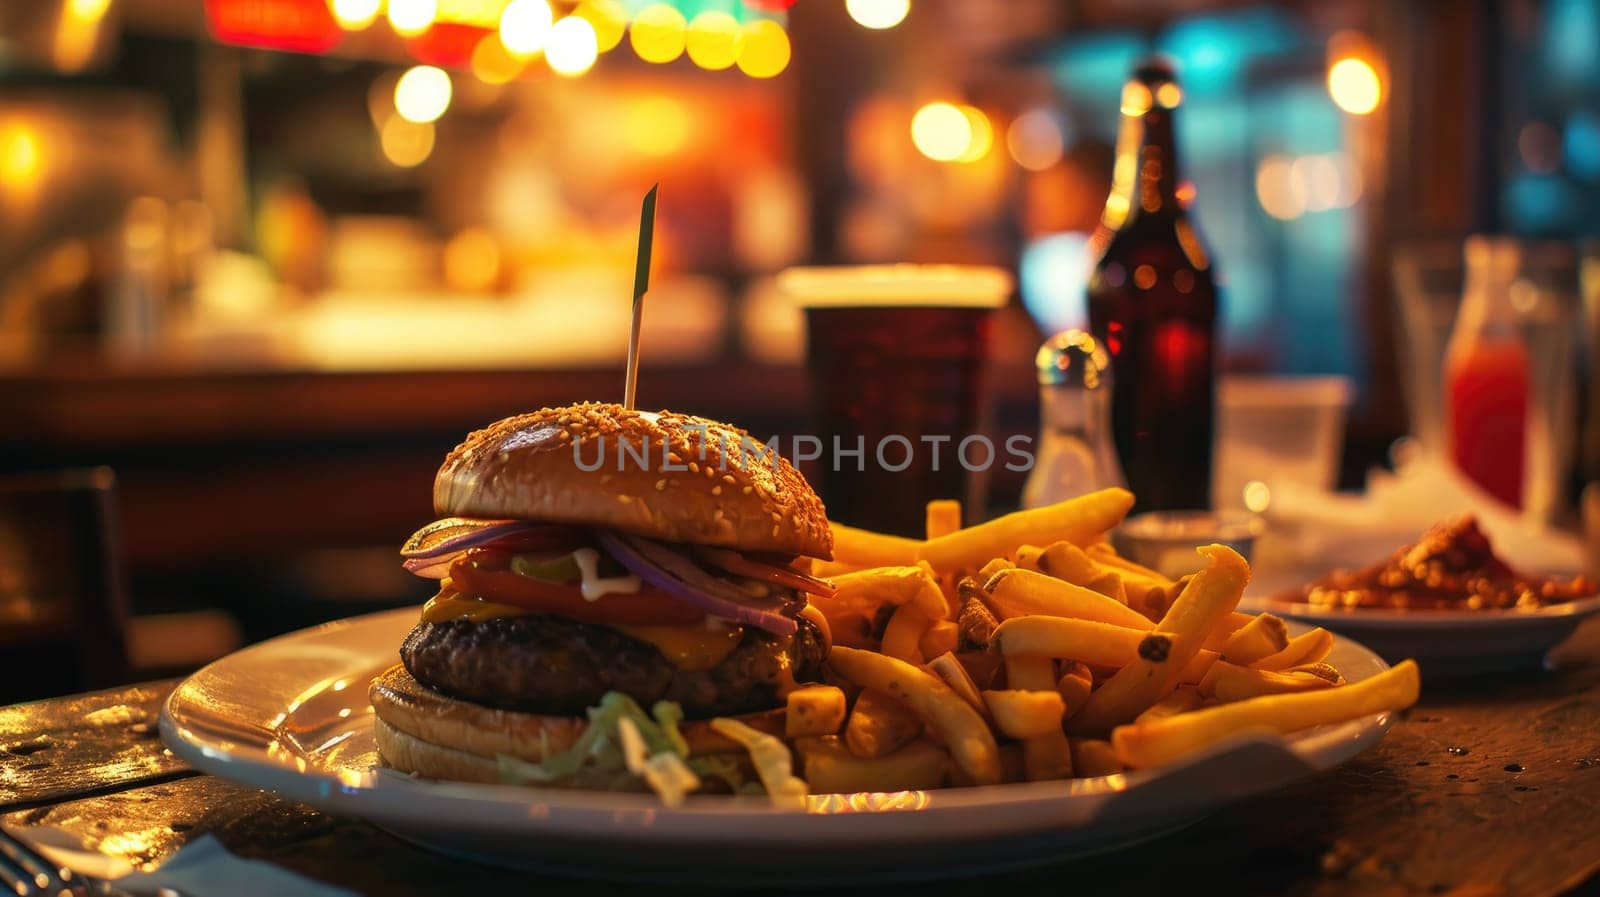 Delicious dinner in a cafe a juicy hamburger and crispy fries on a cozy table